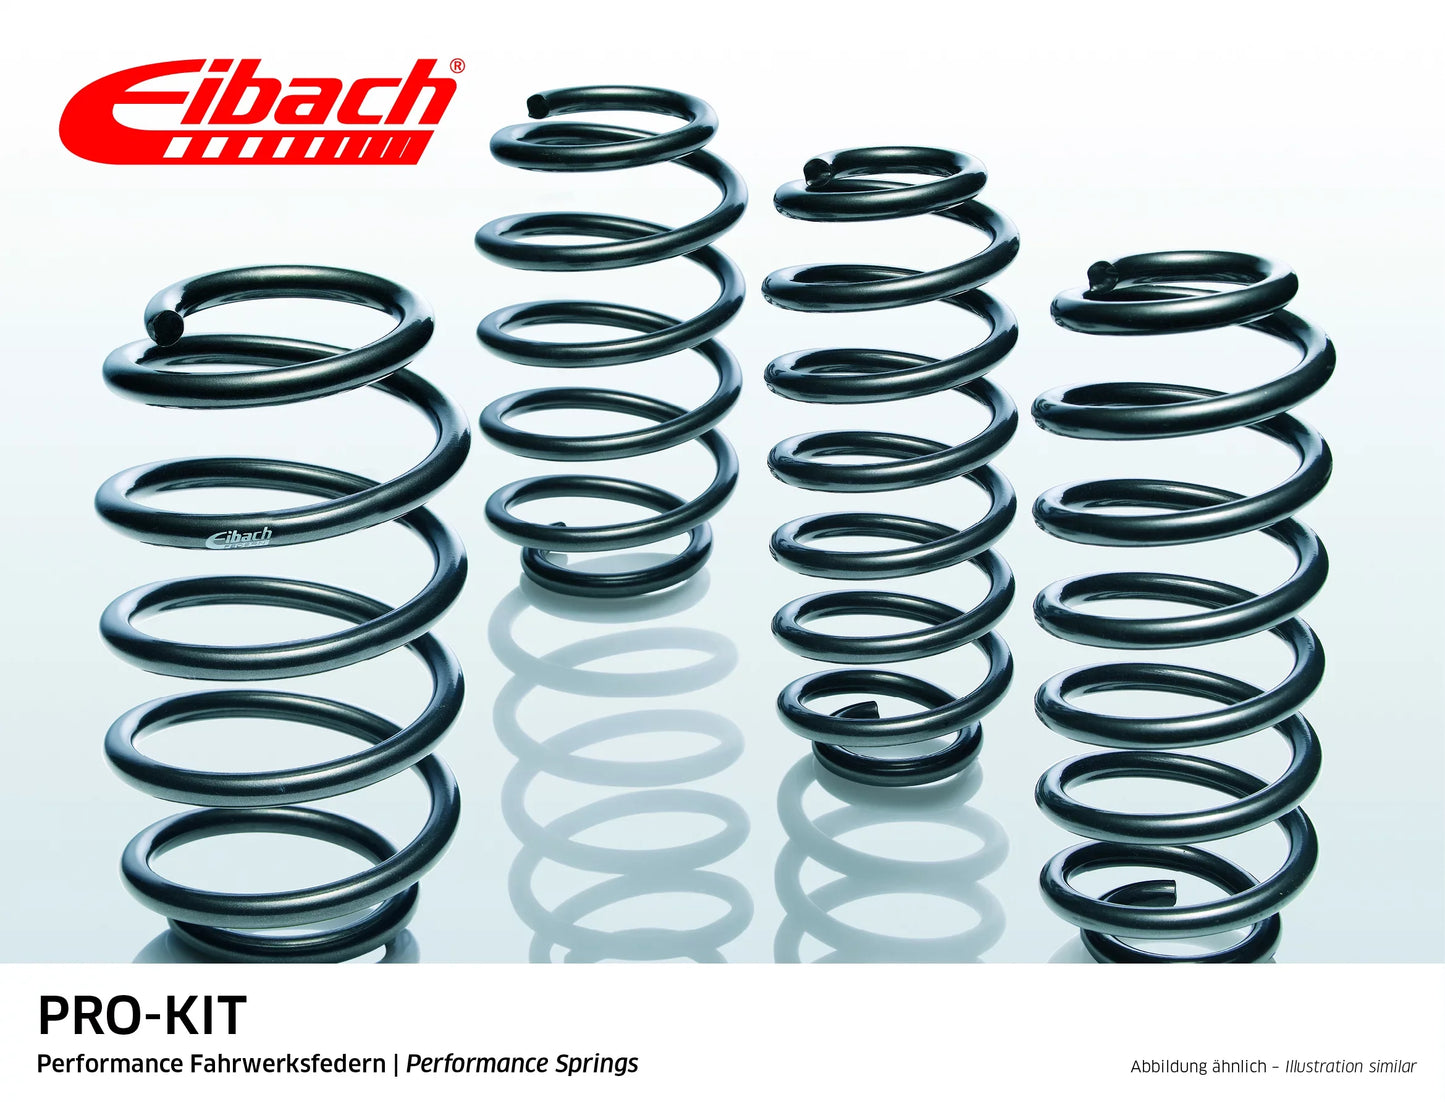 Eibach Pro-Kit Lowering Springs (E10-15-014-02-22) at £210.94